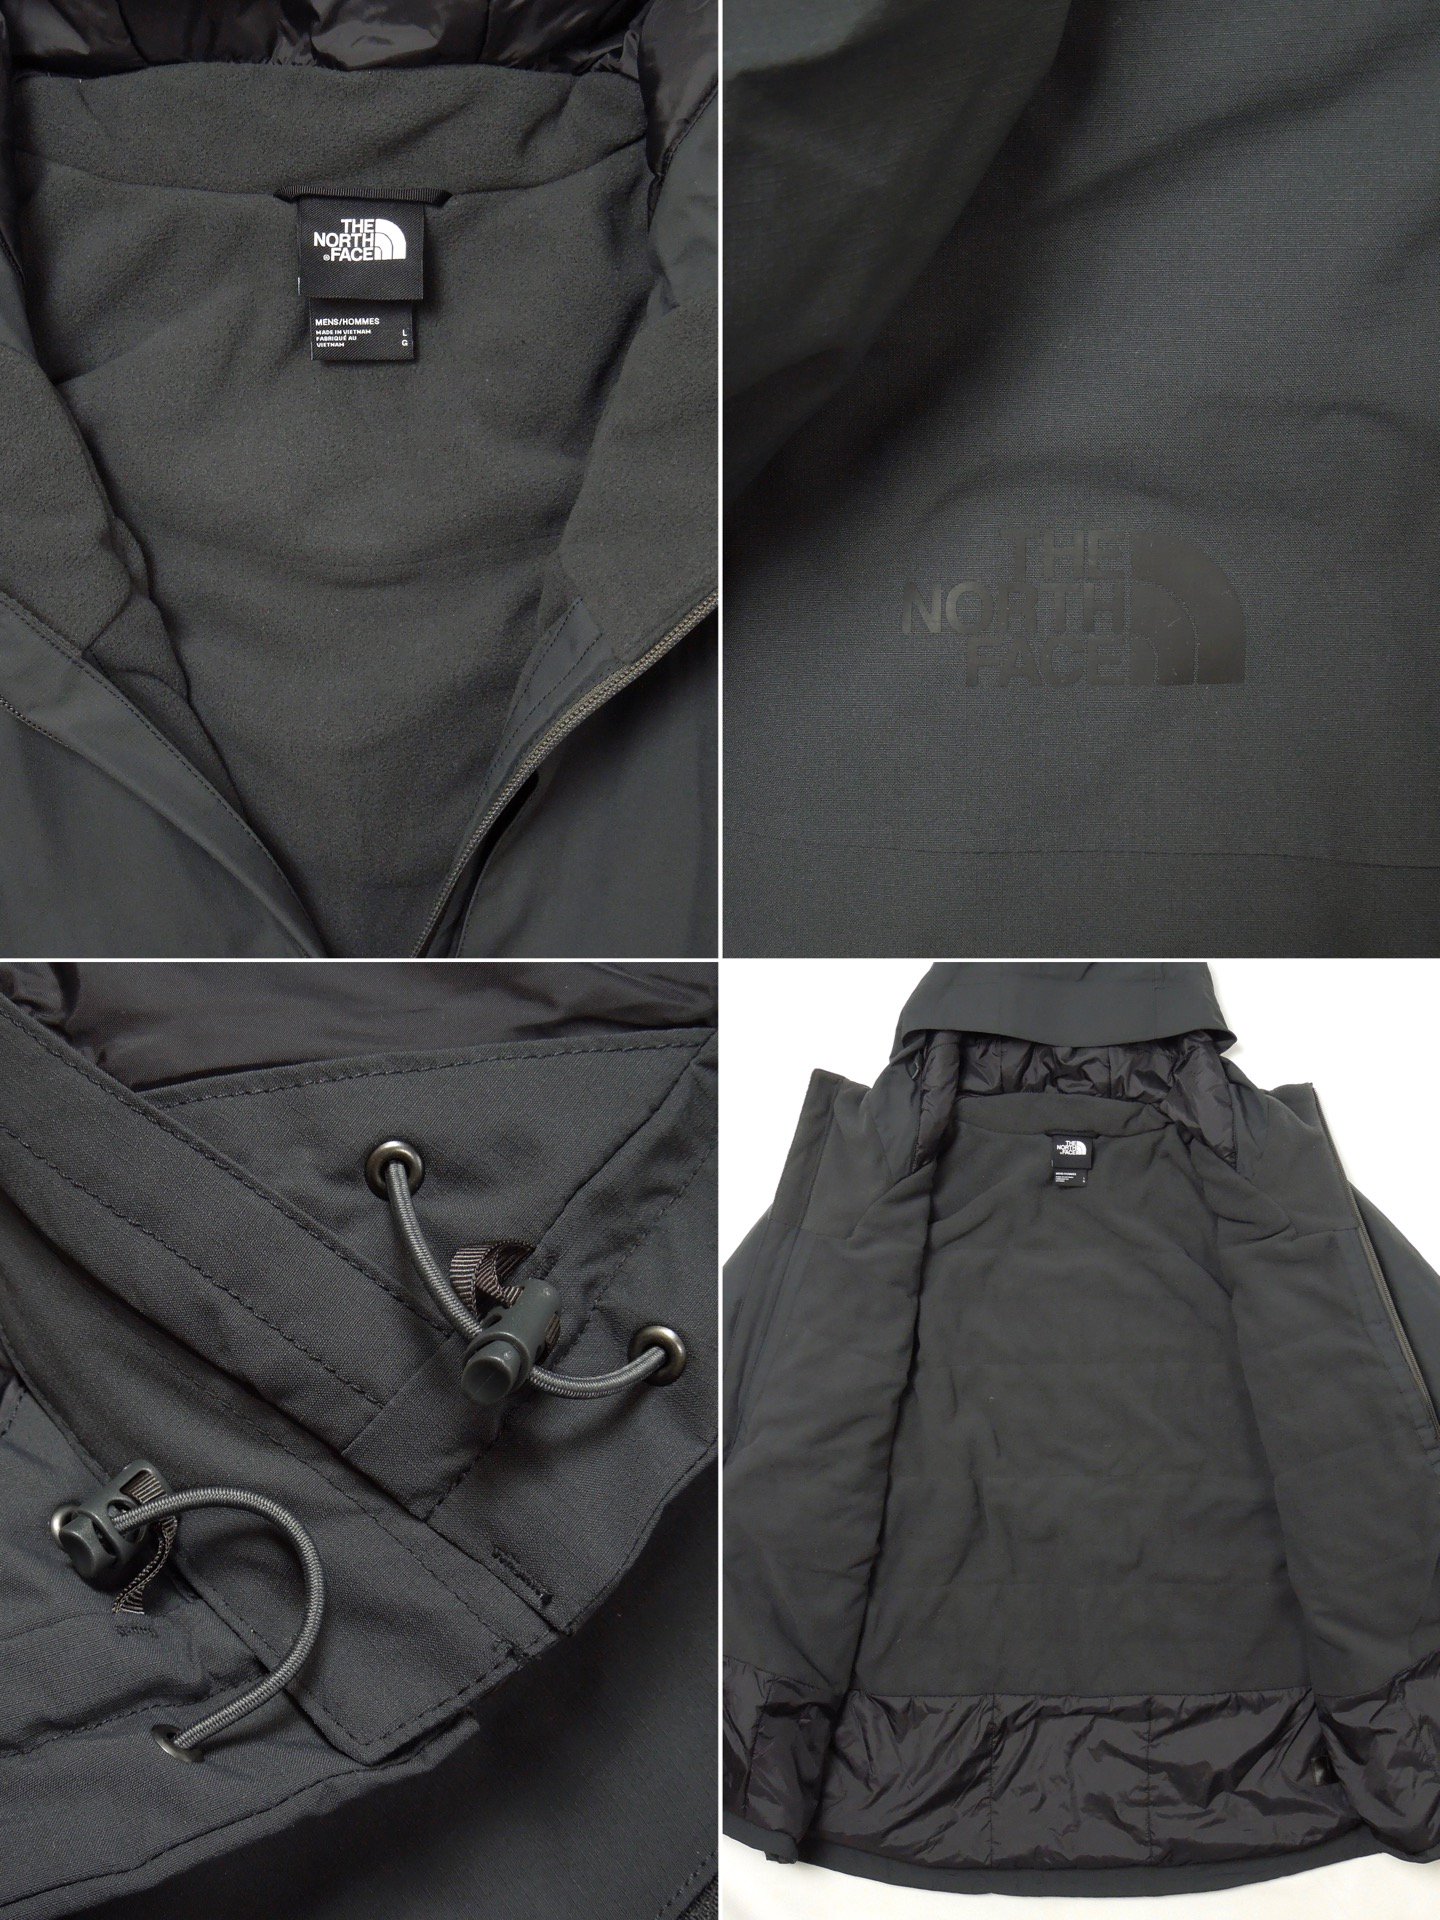 [THE NORTH FACE] INLUX INSULATED JACKET「US限定モデル」(GR) - FLASH POINT Web Shop